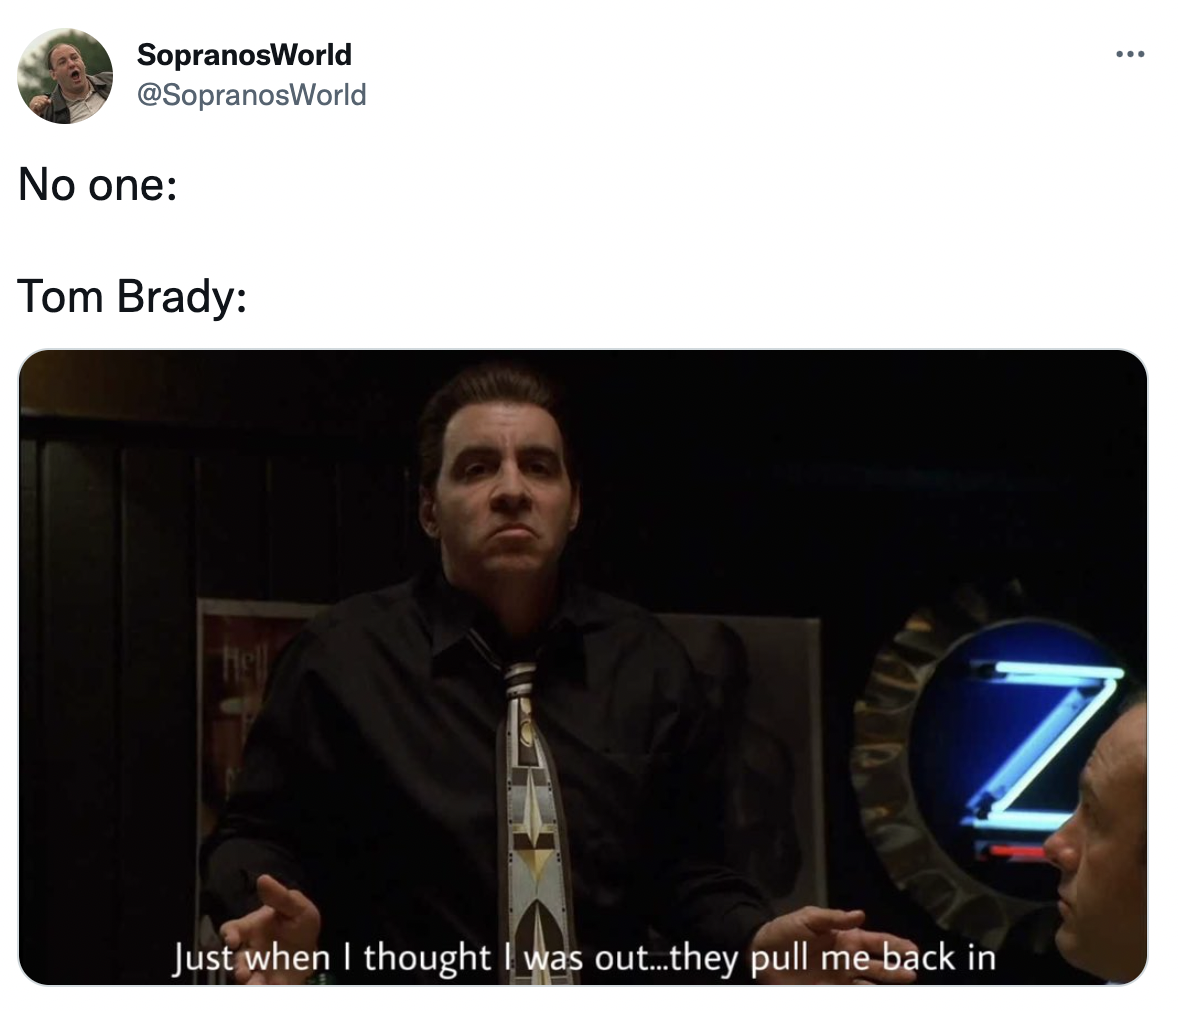 Tom Brady un-retirement memesjust when i thought i was out sopranos - . SopranosWorld No one Tom Brady Z Just when I thought I was out..they pull me back in